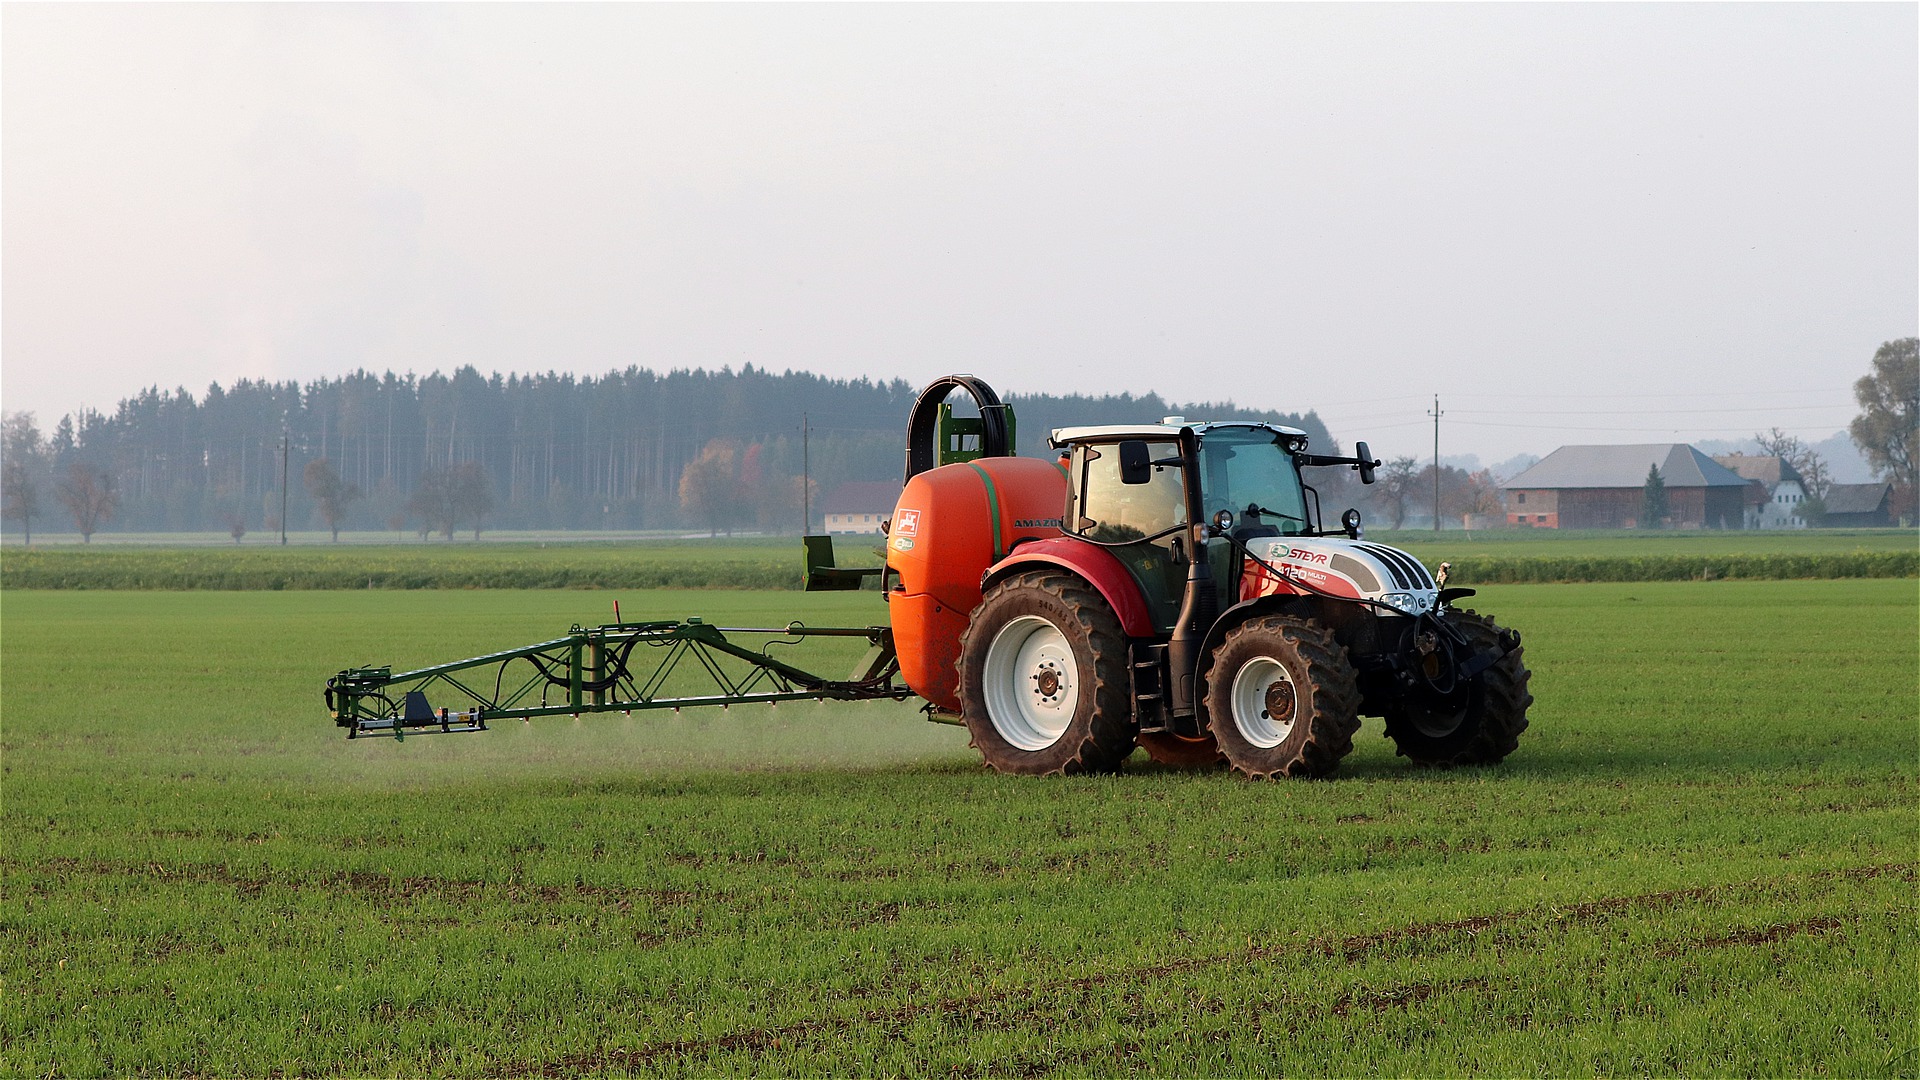 Red tractor in a field spraying crops